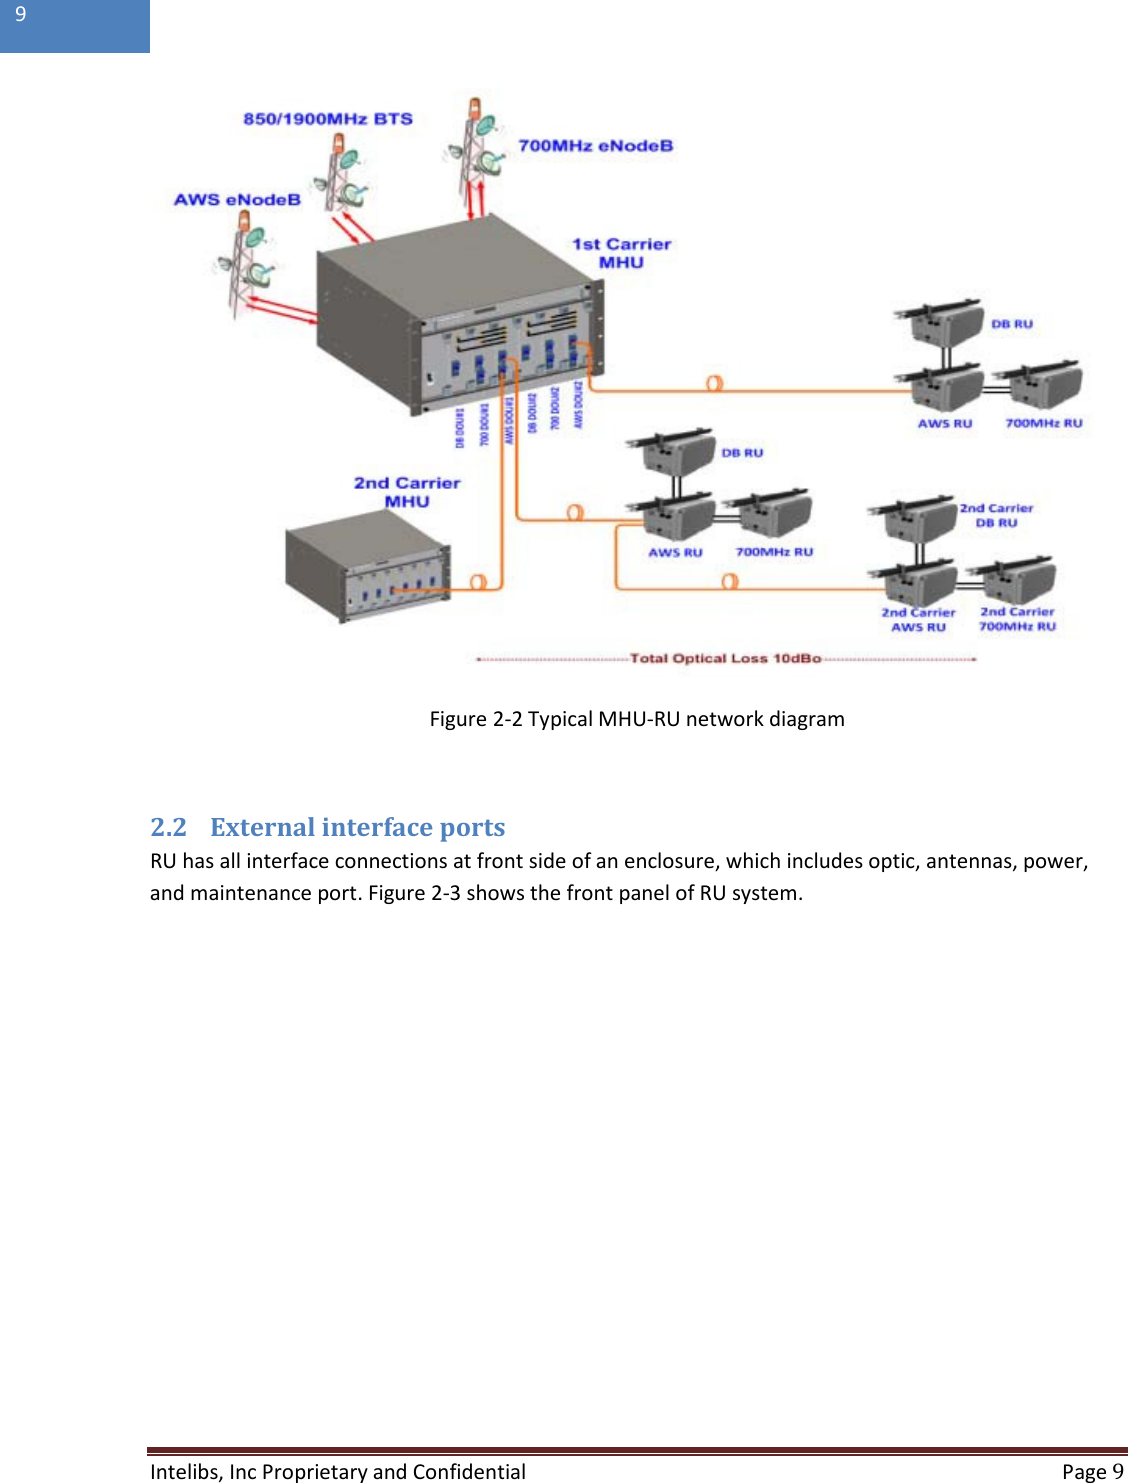  Intelibs, Inc Proprietary and Confidential  Page 9  9    Figure 2-2 Typical MHU-RU network diagram  2.2 External interface ports  RU has all interface connections at front side of an enclosure, which includes optic, antennas, power, and maintenance port. Figure 2-3 shows the front panel of RU system.  